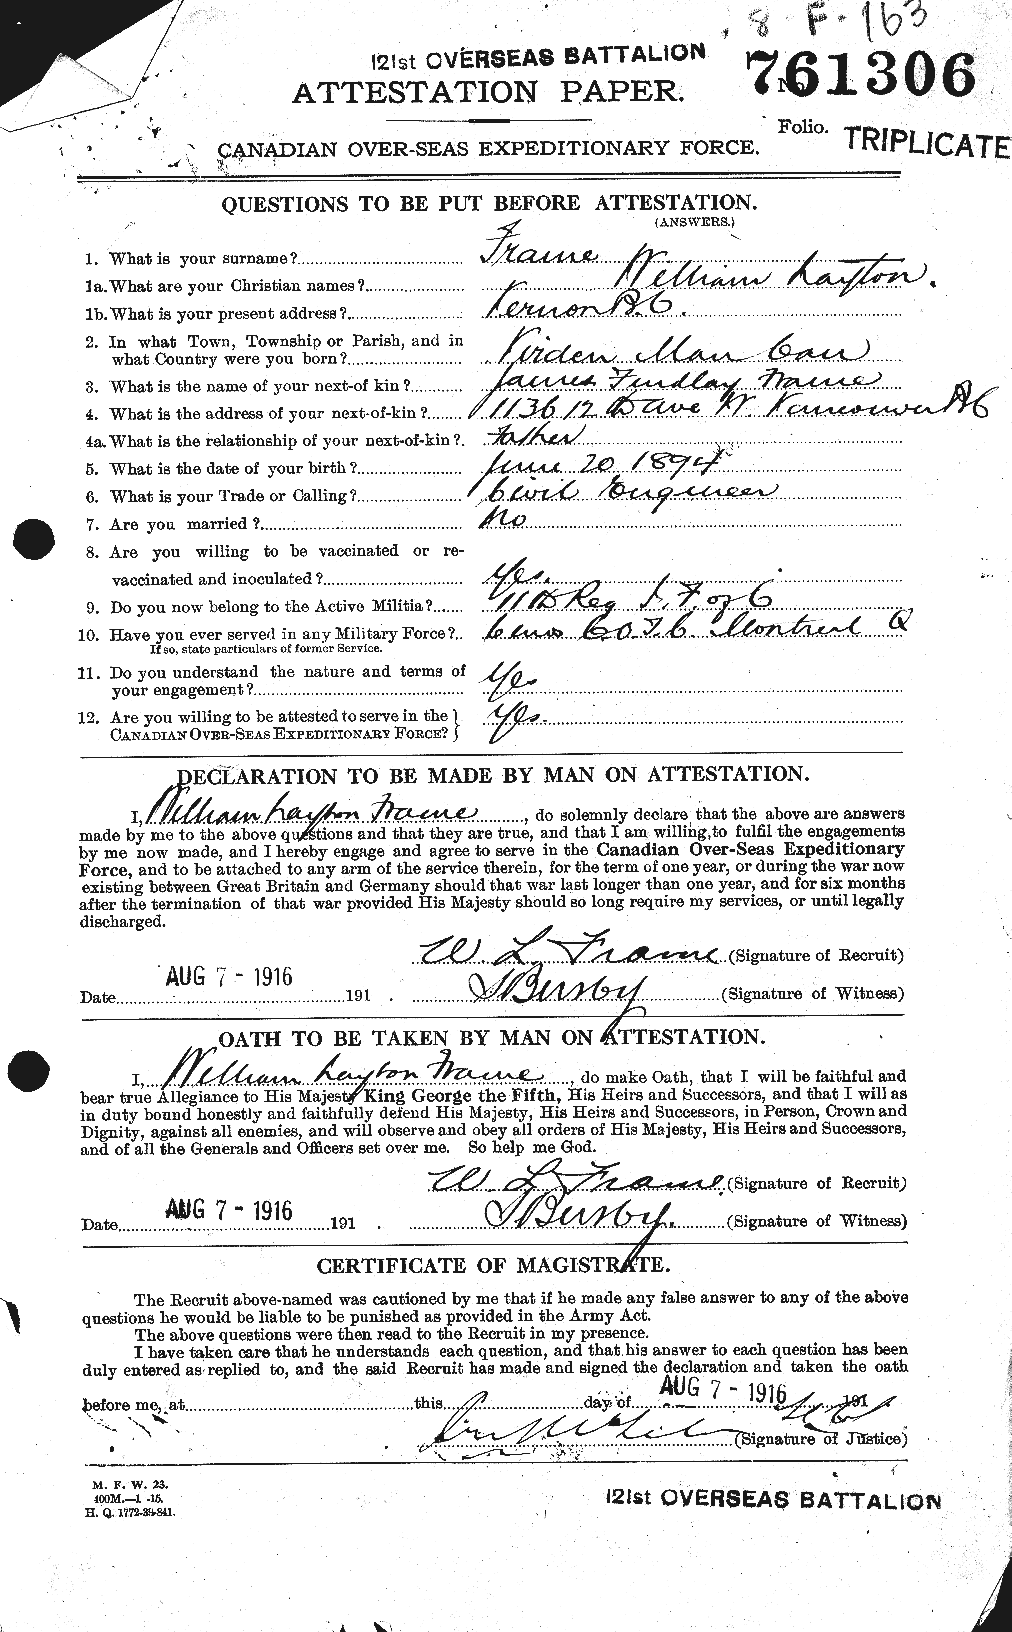 Personnel Records of the First World War - CEF 335970a